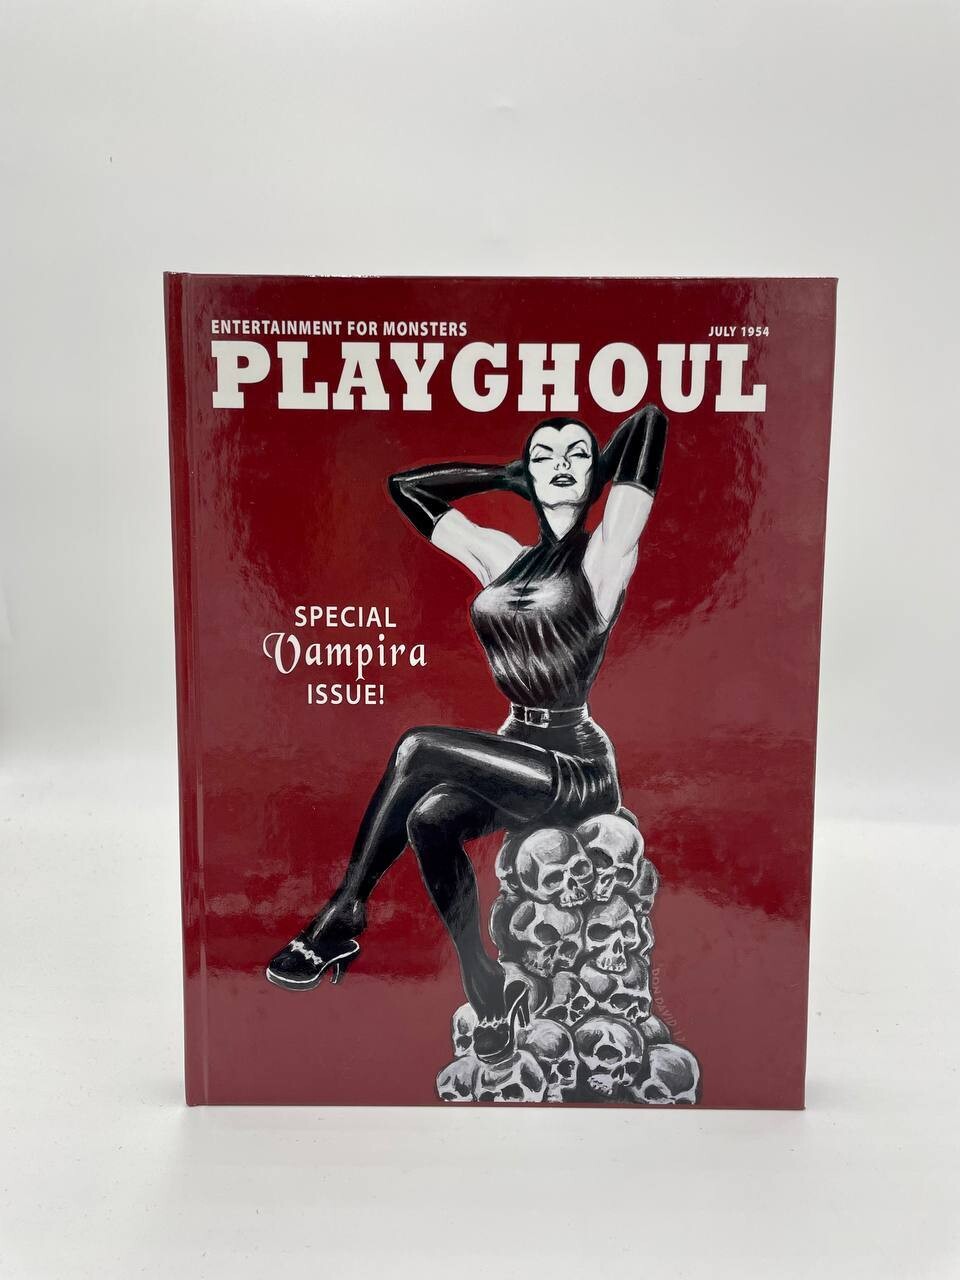 PLAYGHOUL Special Vampira Issue by Mike Decay